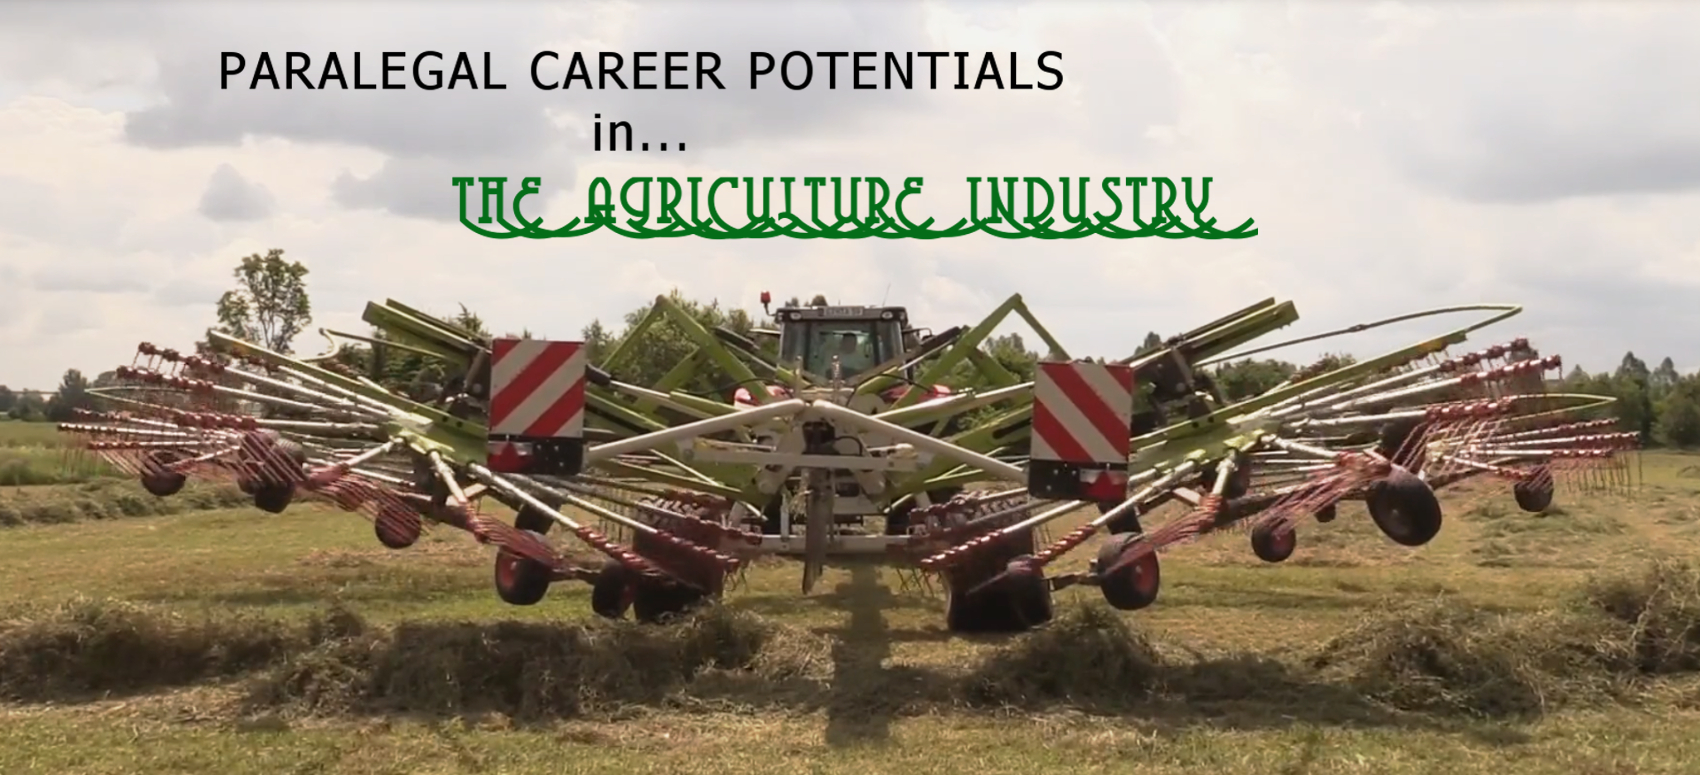 Paralegal and LDA career potentials in Agriculture